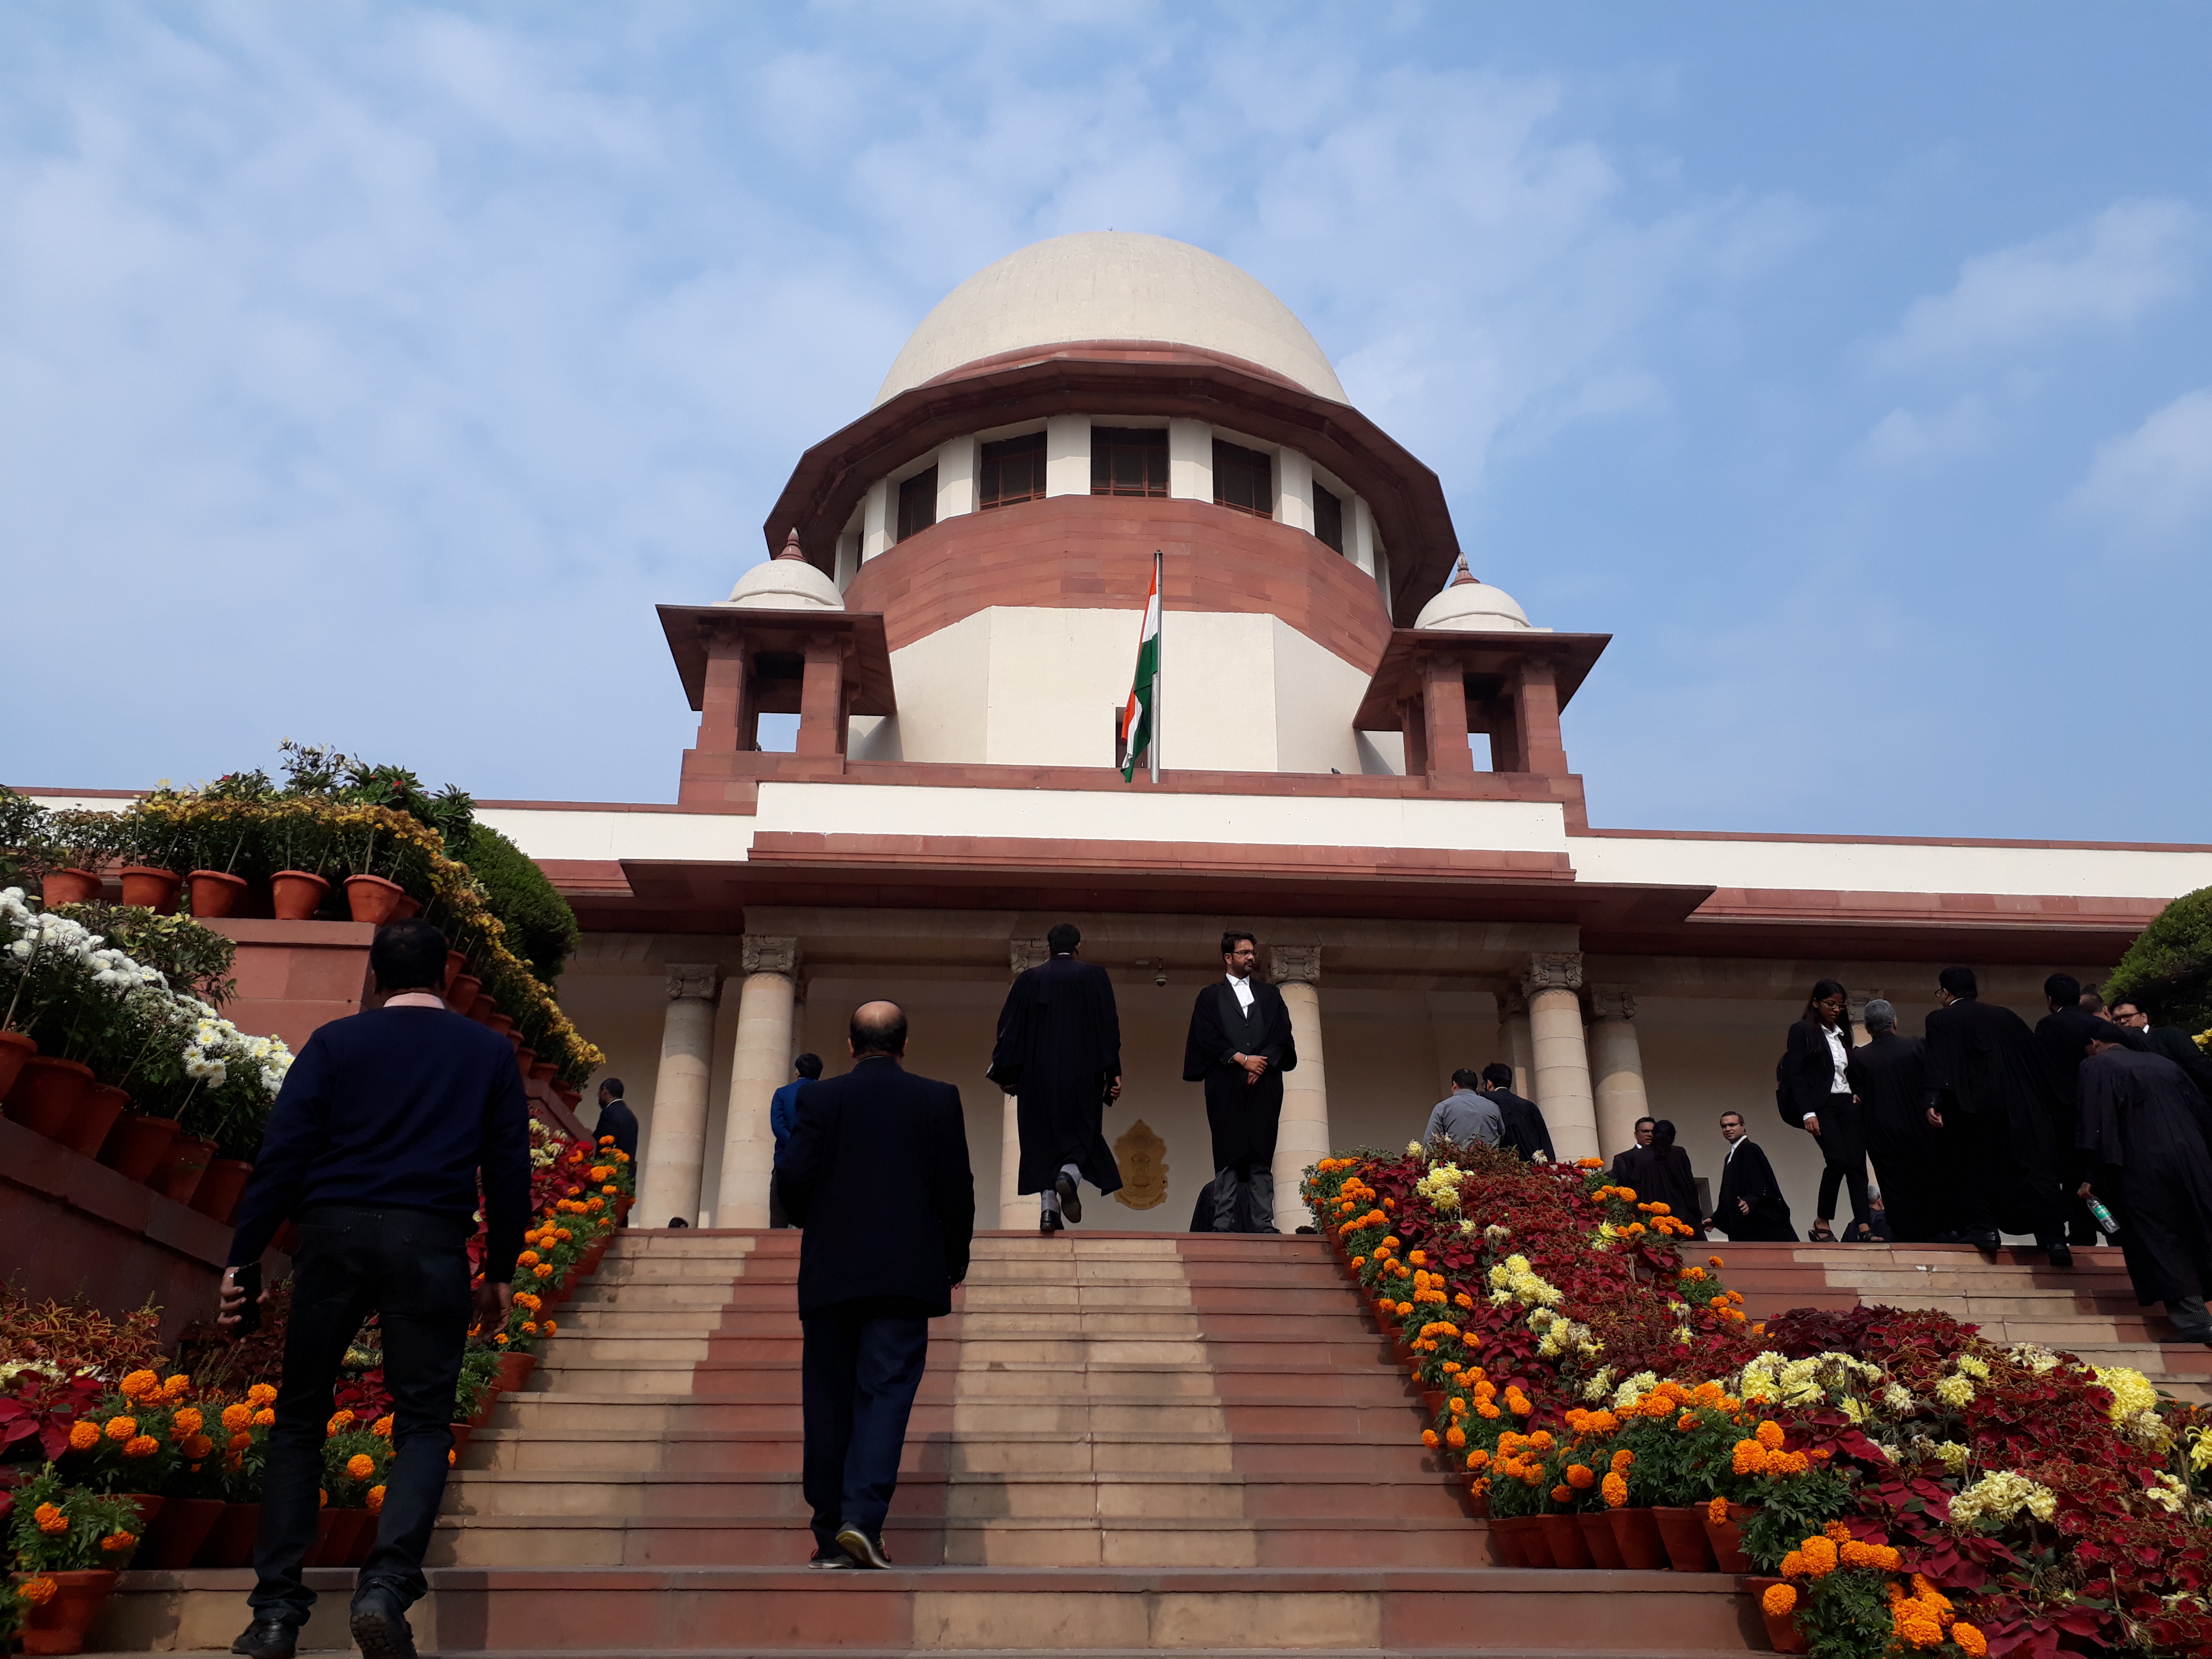 Lawyers filing PILs for the poor in the Supreme Court of India